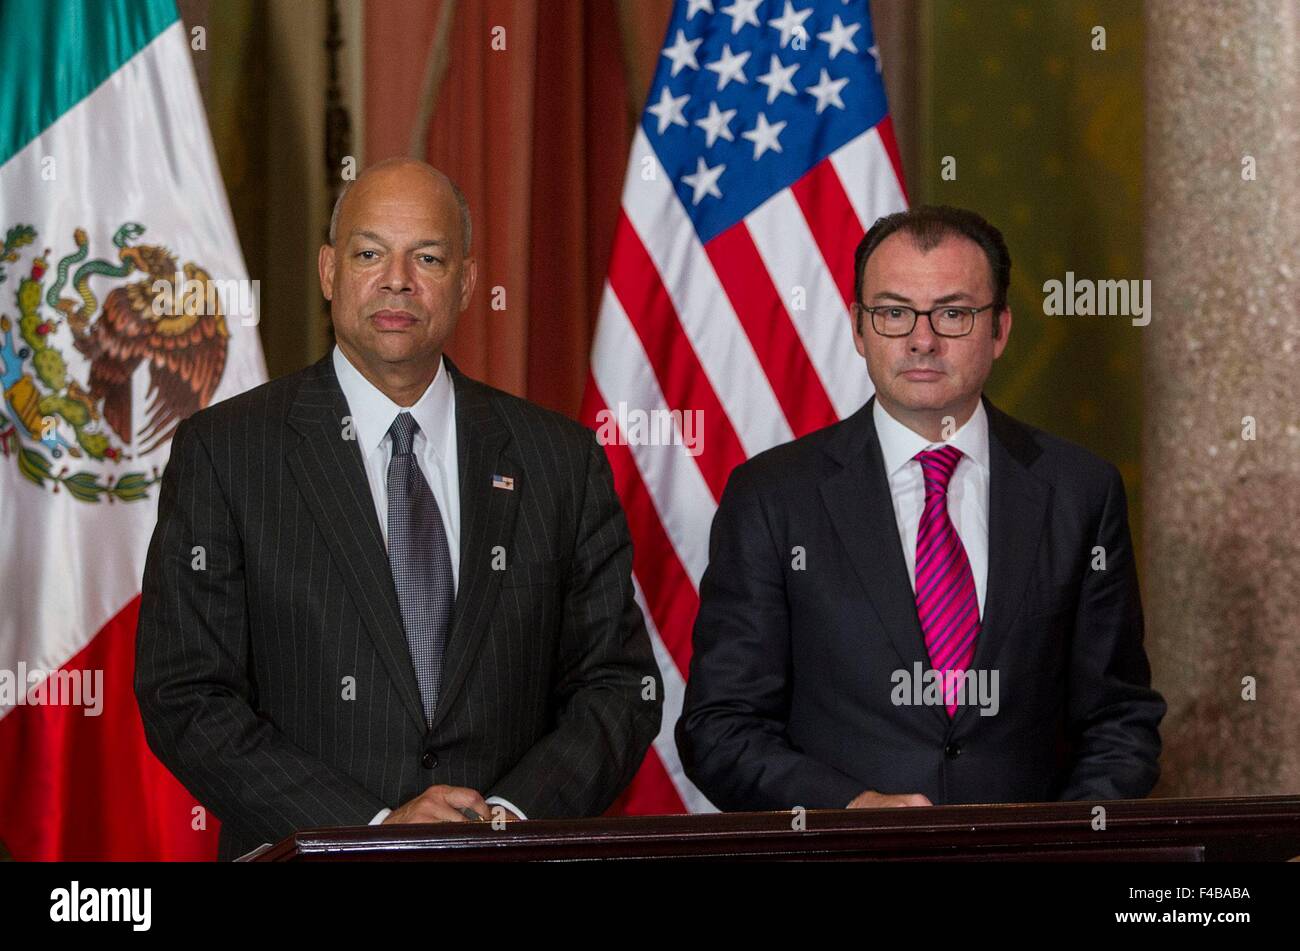 Mexico City, Mexico. 15th Oct, 2015. Mexico's Finance Minister Luis Videgaray(R) and U.S. Department of Homeland Security (DHS) Secretary Jeh Johnson take part in press conference in Mexico City, capital of Mexico, on Oct. 15, 2015. Credit:  Jessica Espinosa/NOTIMEX/Xinhua/Alamy Live News Stock Photo